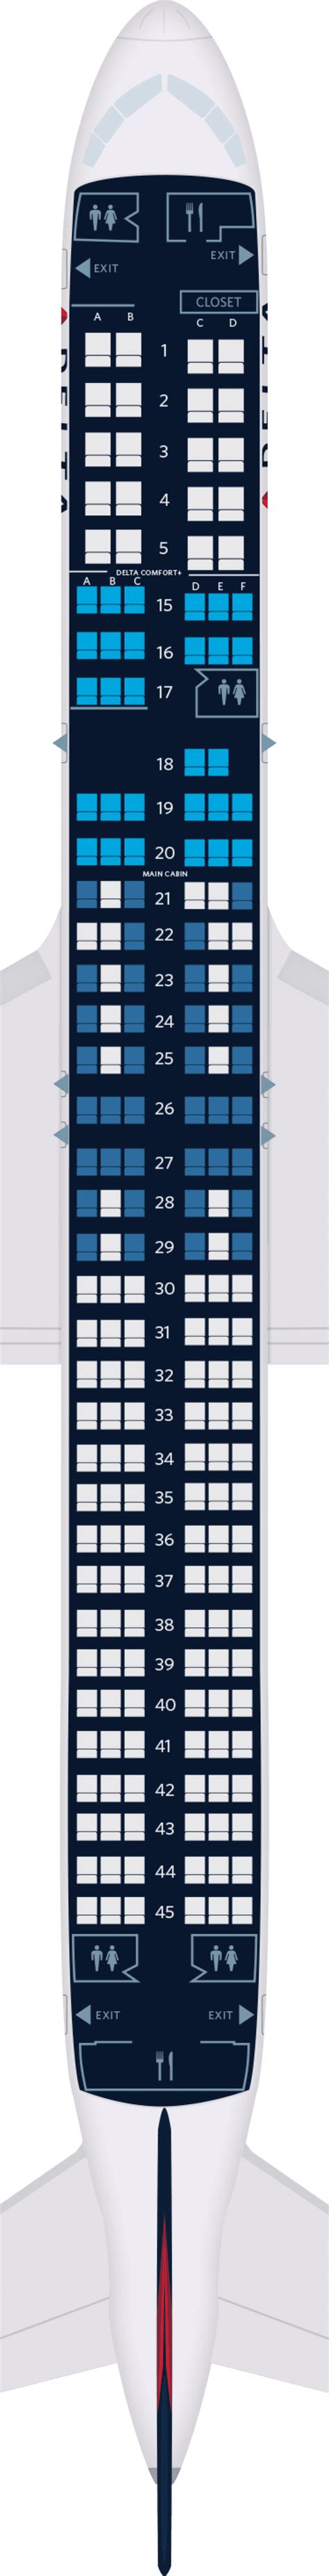 757 delta plane seating. Most Delta customers choose their seats when purchasing a ticket. Basic Economy customers are assigned seats by Delta and receive a seat assignment after check-in. These seat assig... 